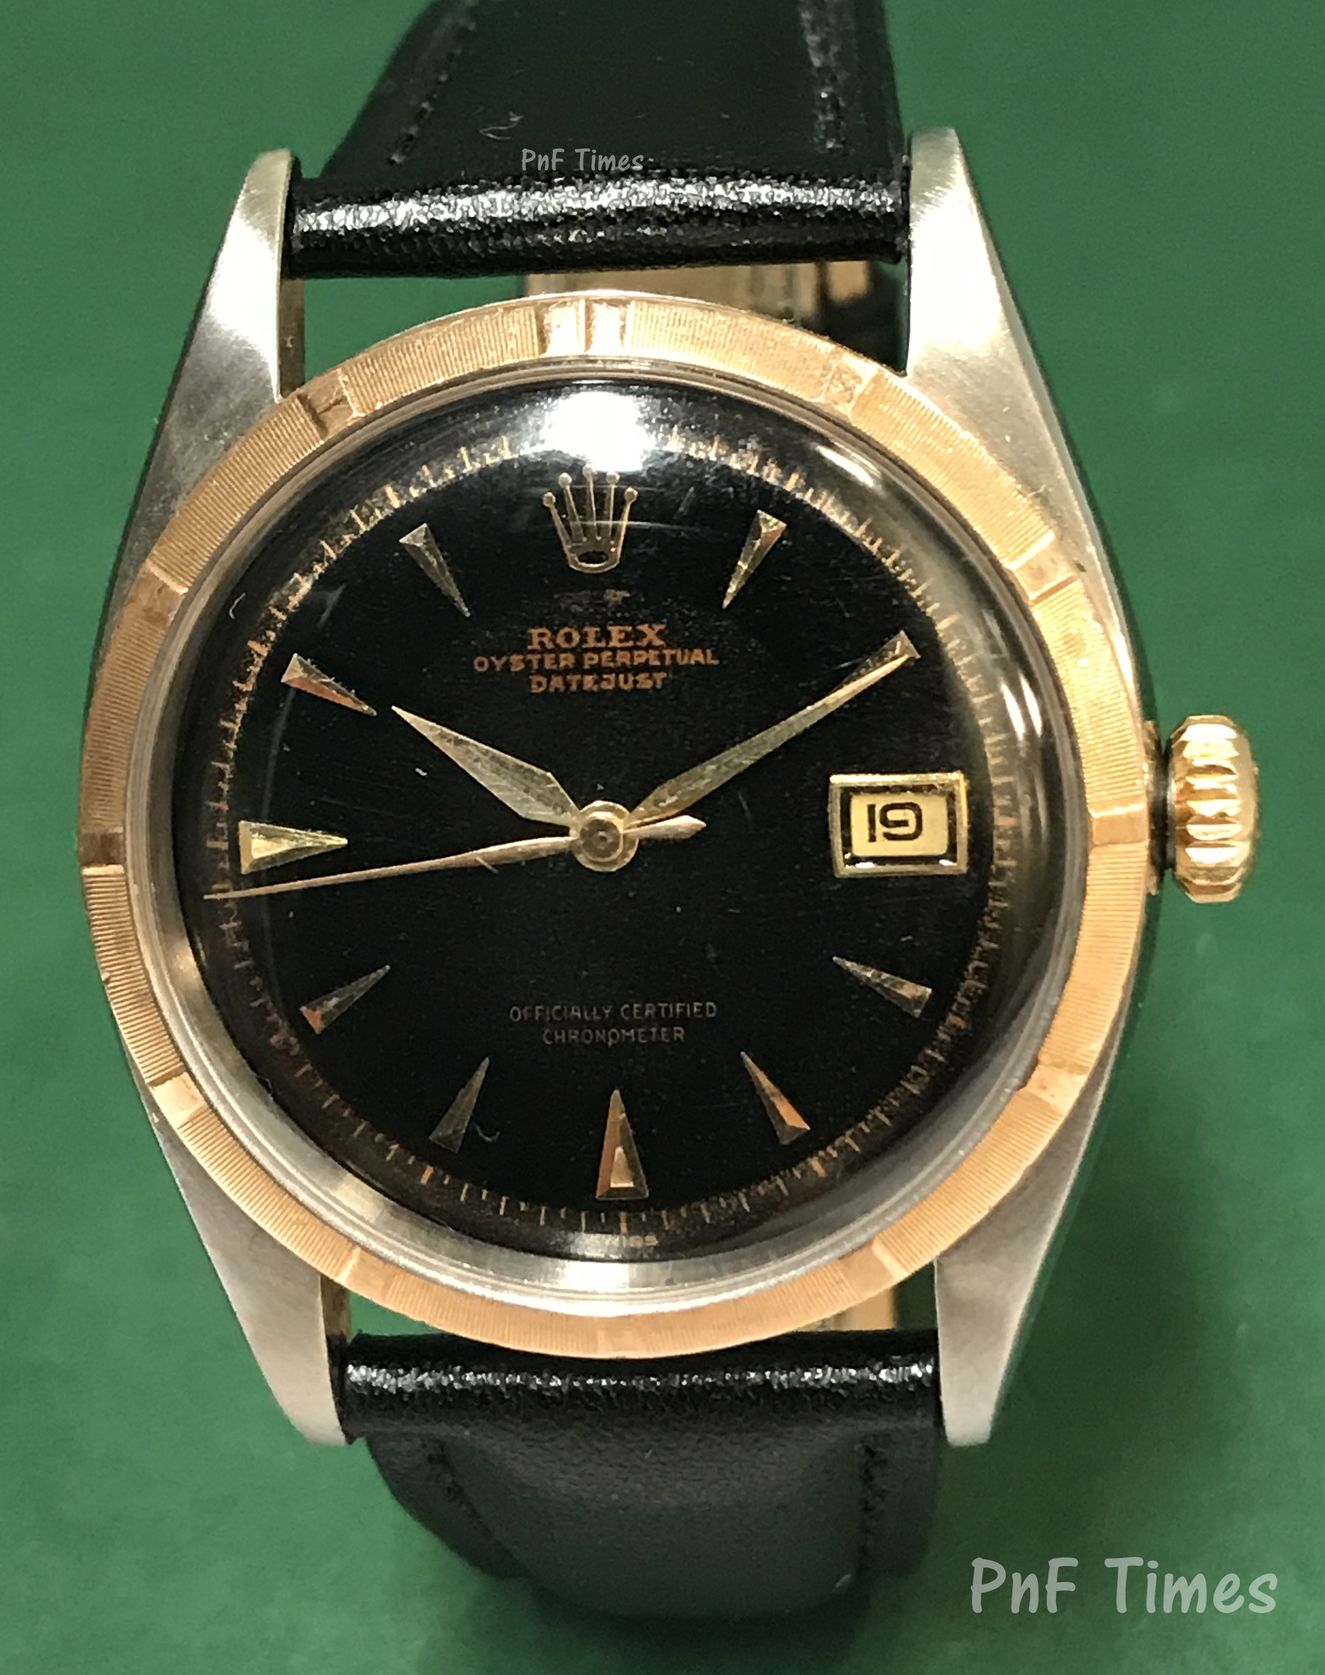 rolex oyster perpetual datejust officially certified chronometer